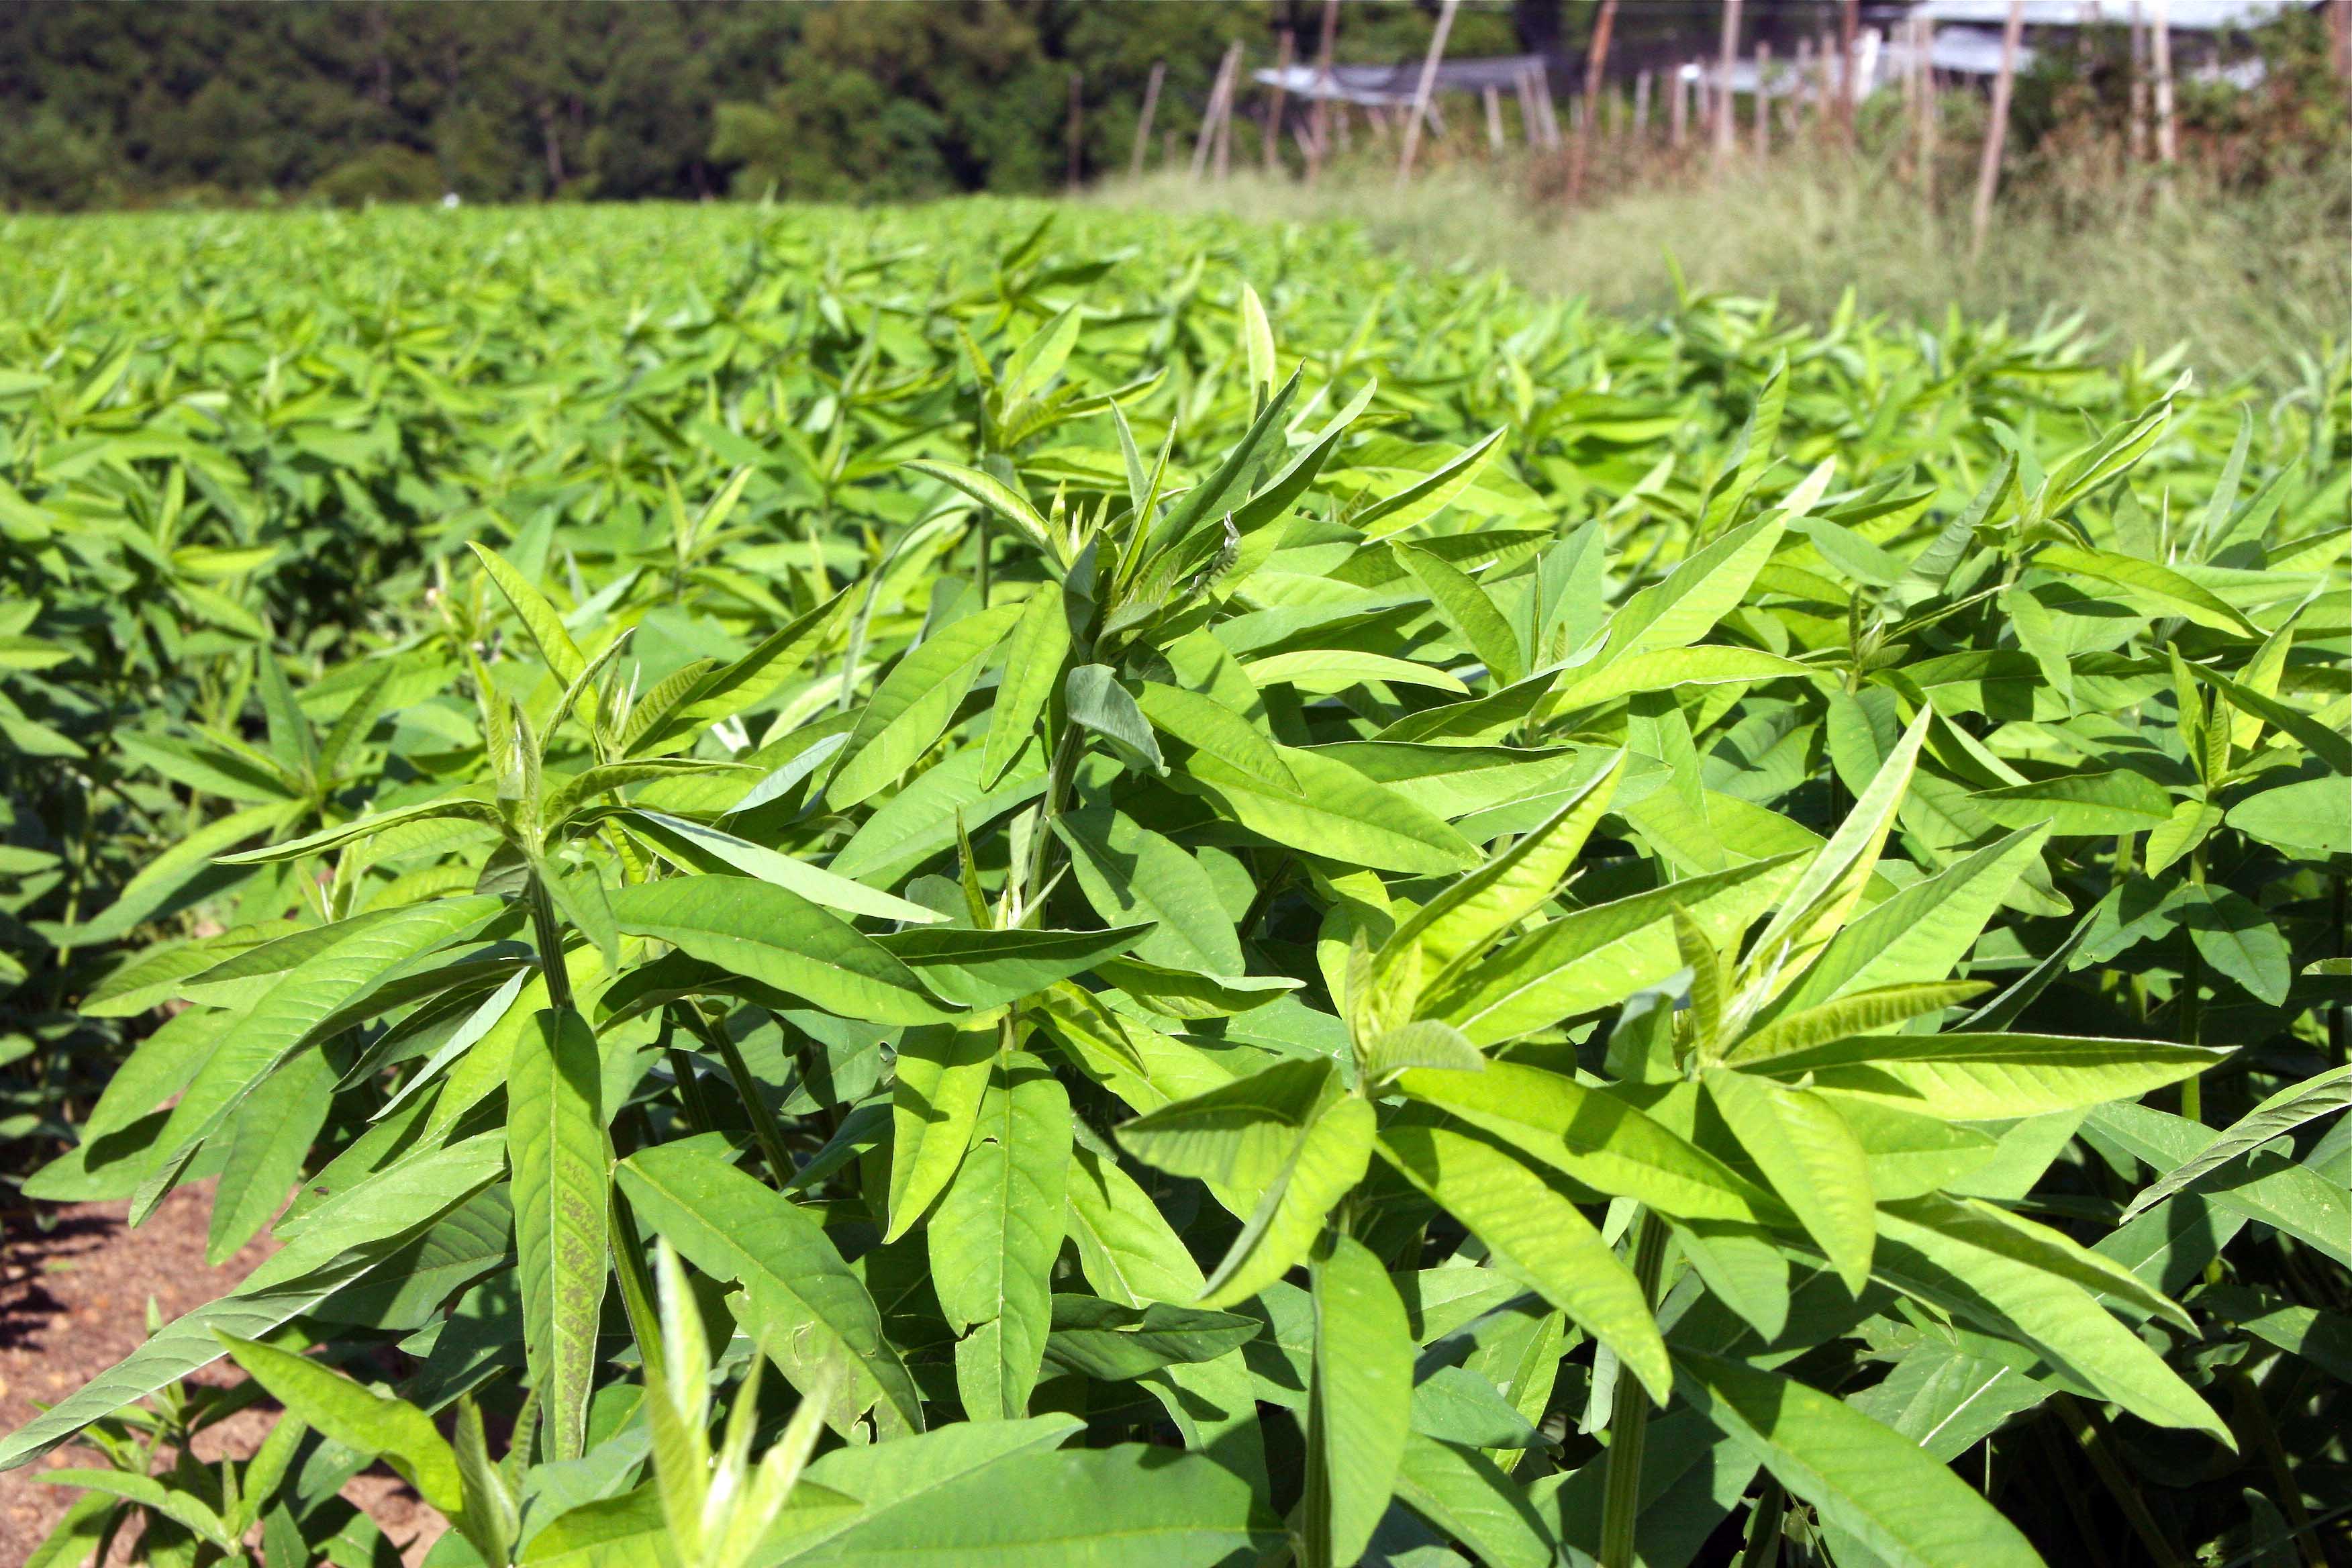 Sunn hemp grows at the University of Georgia campus in Tifton. Along with lupin and bidens, sunn hemp is part of a SARE experimental cover cropping system to add fertility to the soil and reduced the incidence of tomato spotted wilt virus in cash crops.